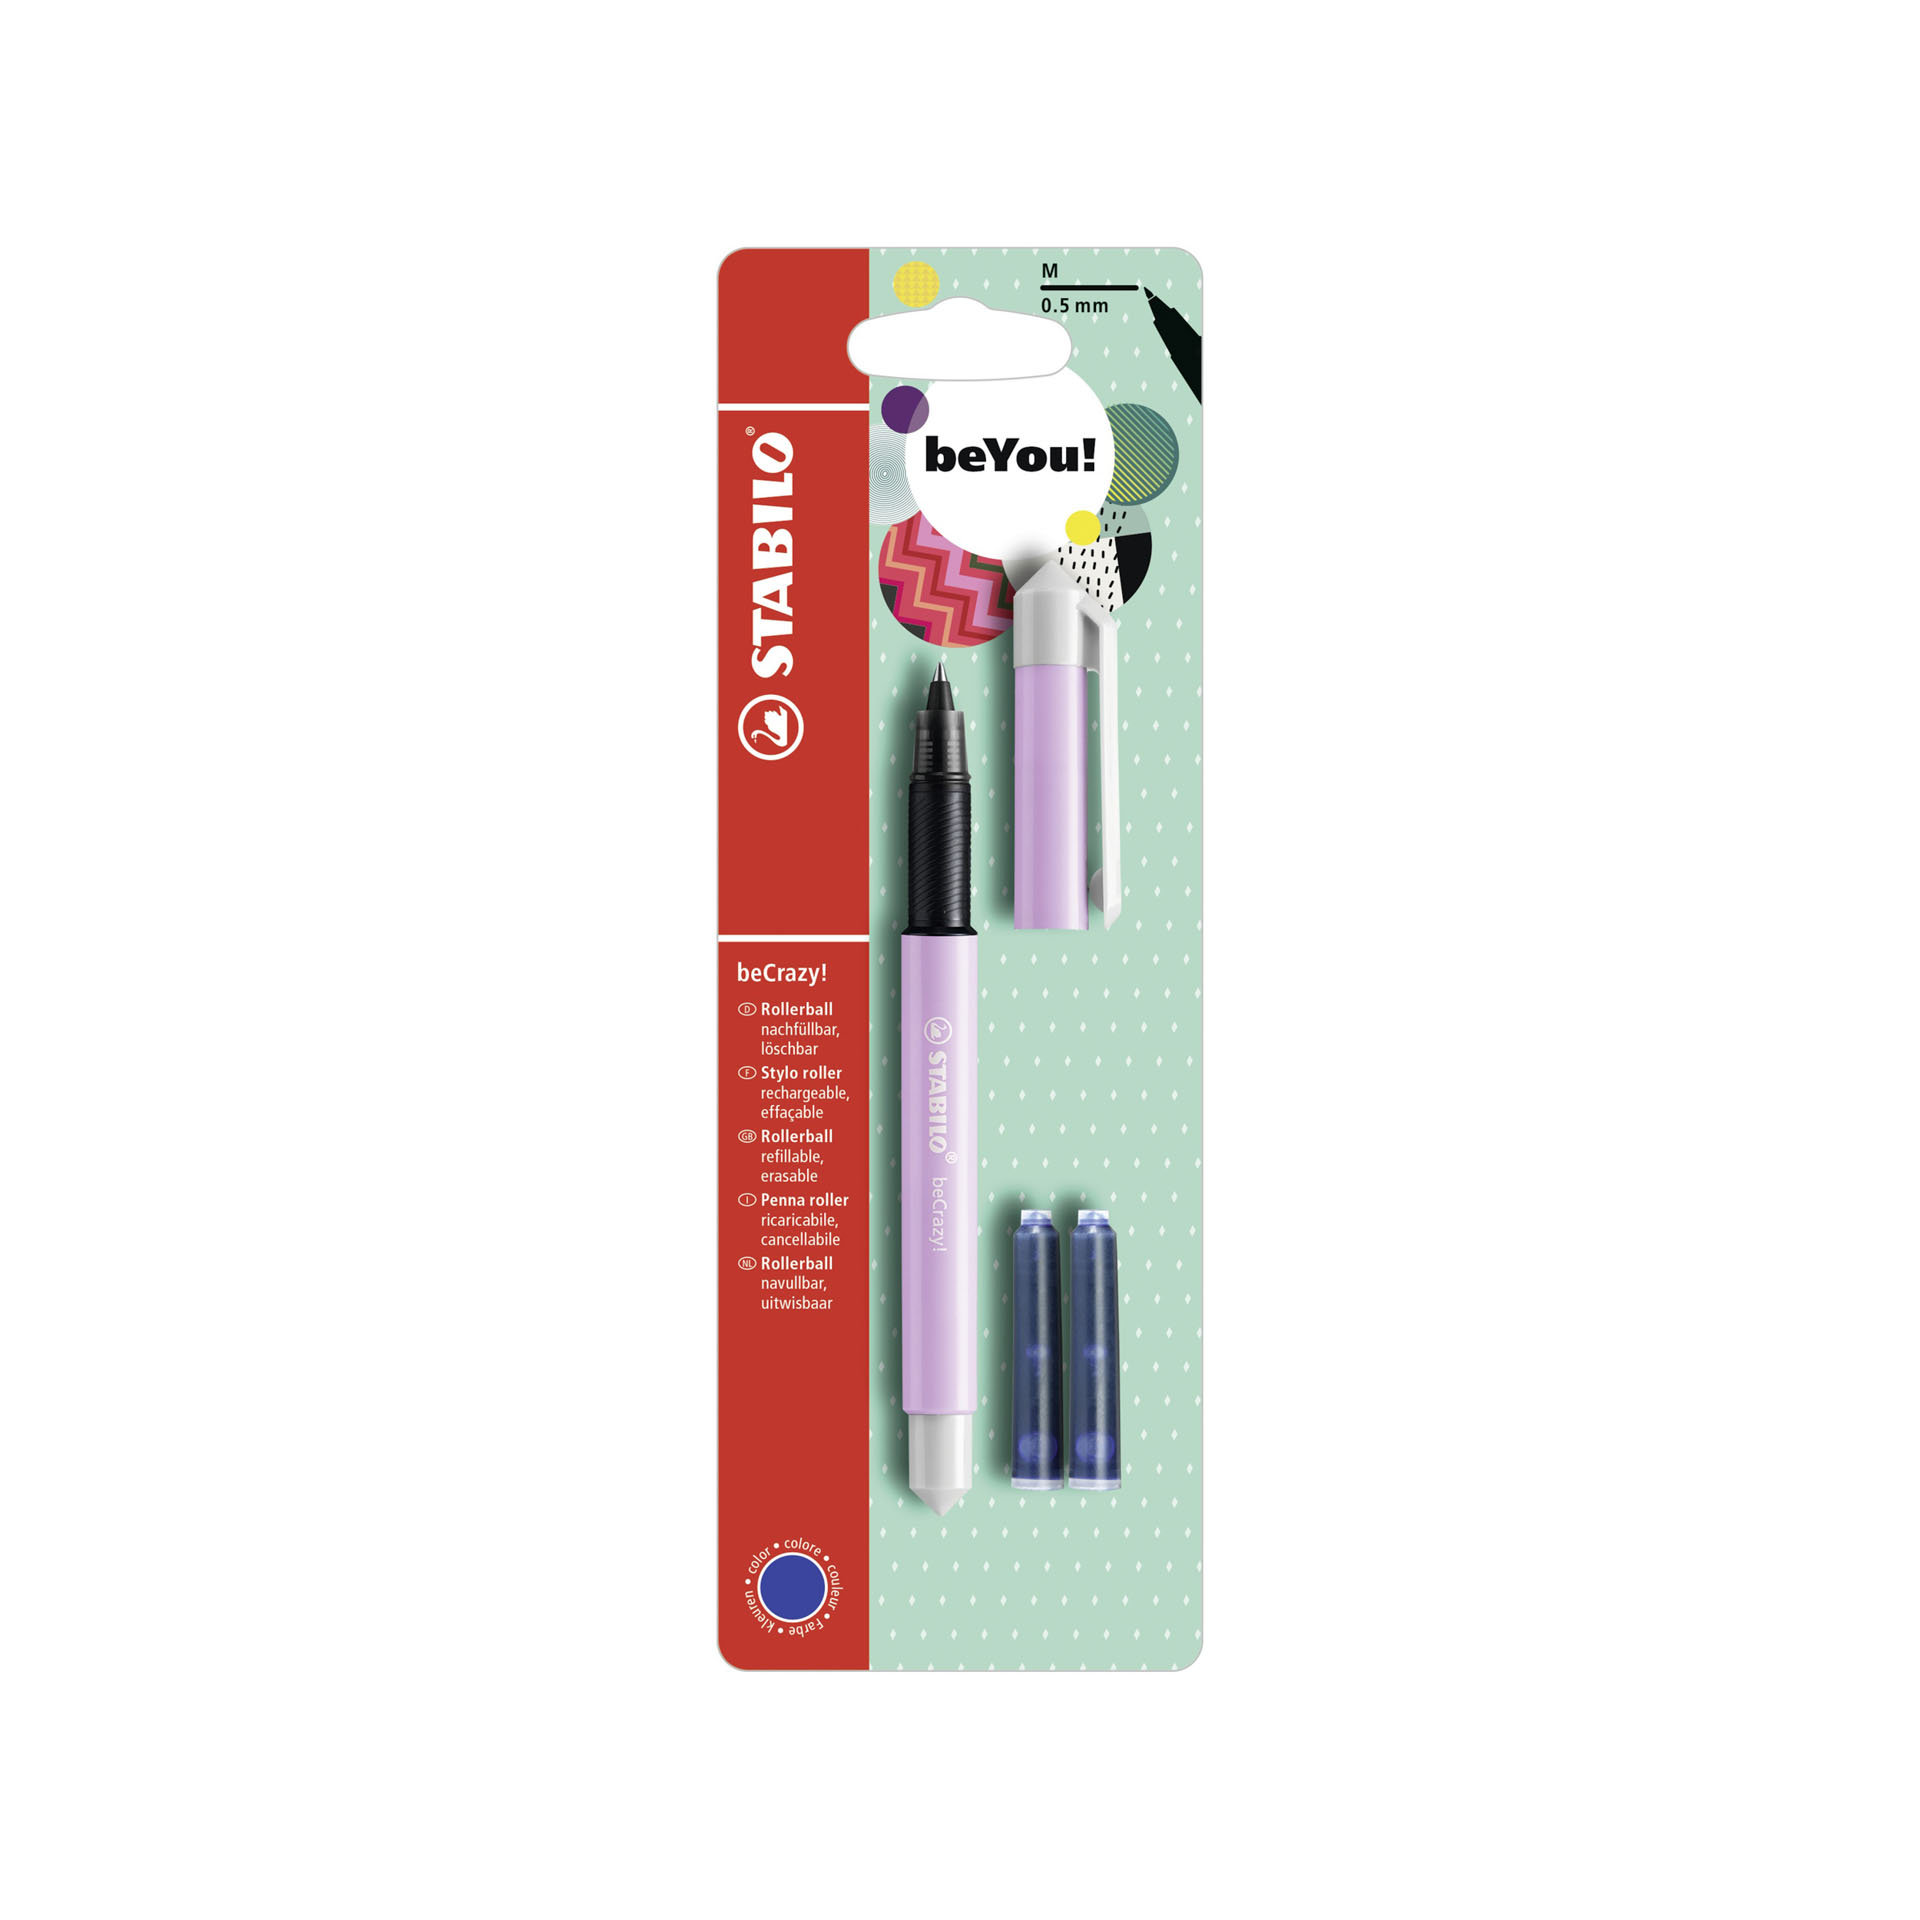 Penna Roller - STABILO beCrazy! Pastel in Lilla - 3 Cartucce Blu incluse, , large